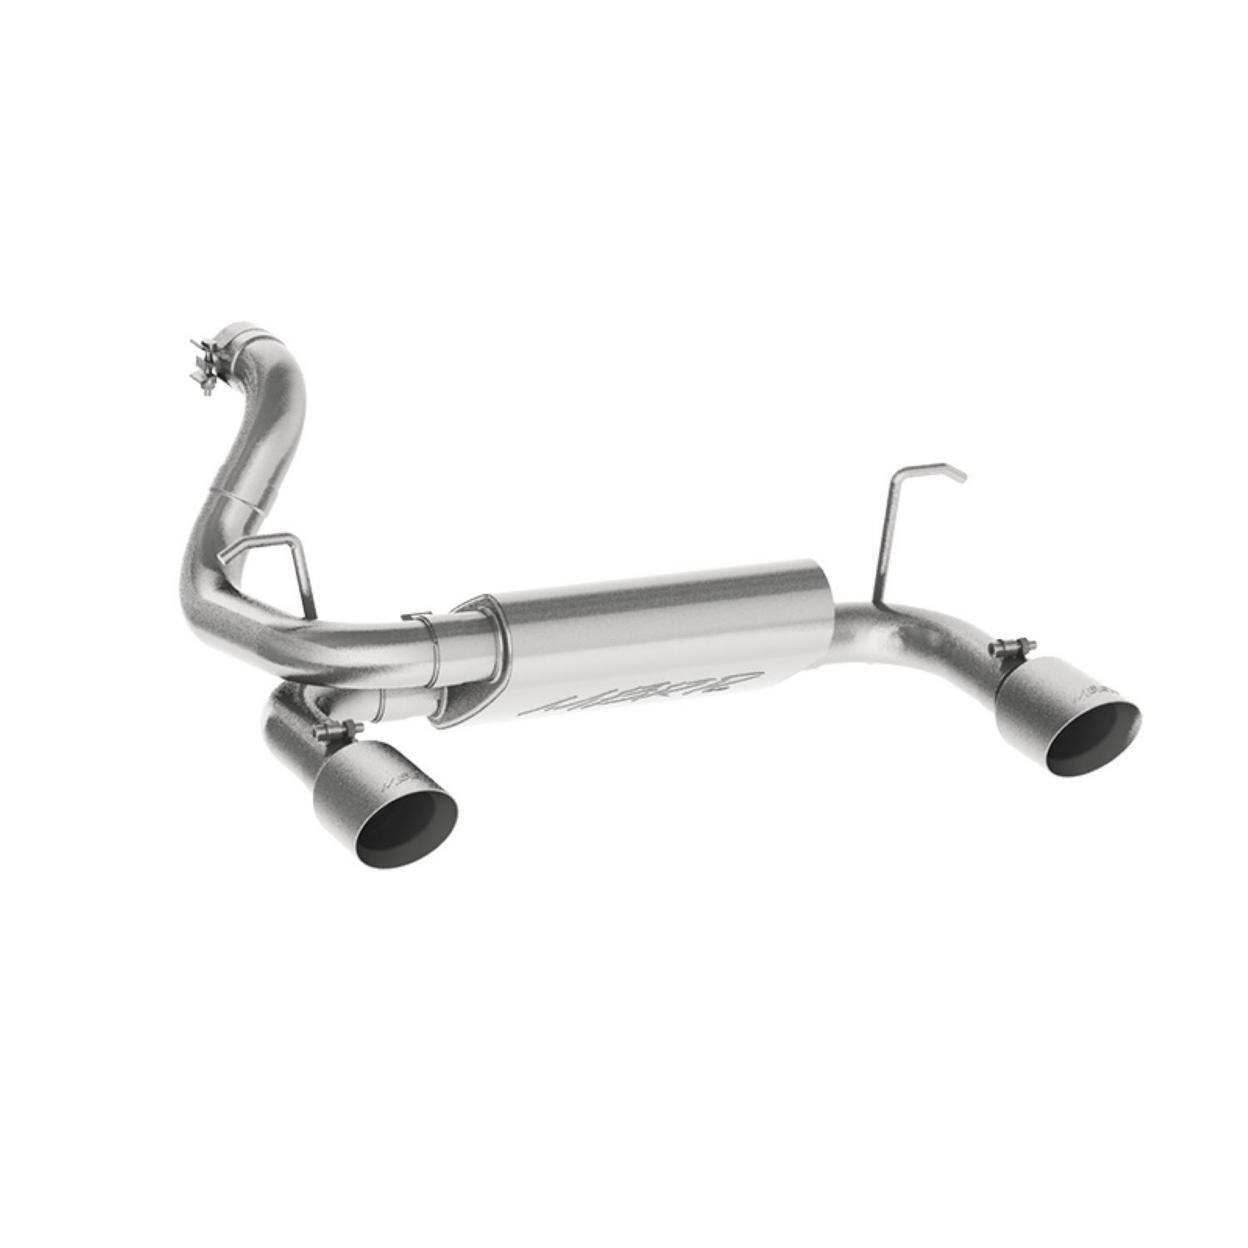 MBRP S5529409-IM Exhaust System Kit Fits 2021 Jeep Wrangler Willys Sport